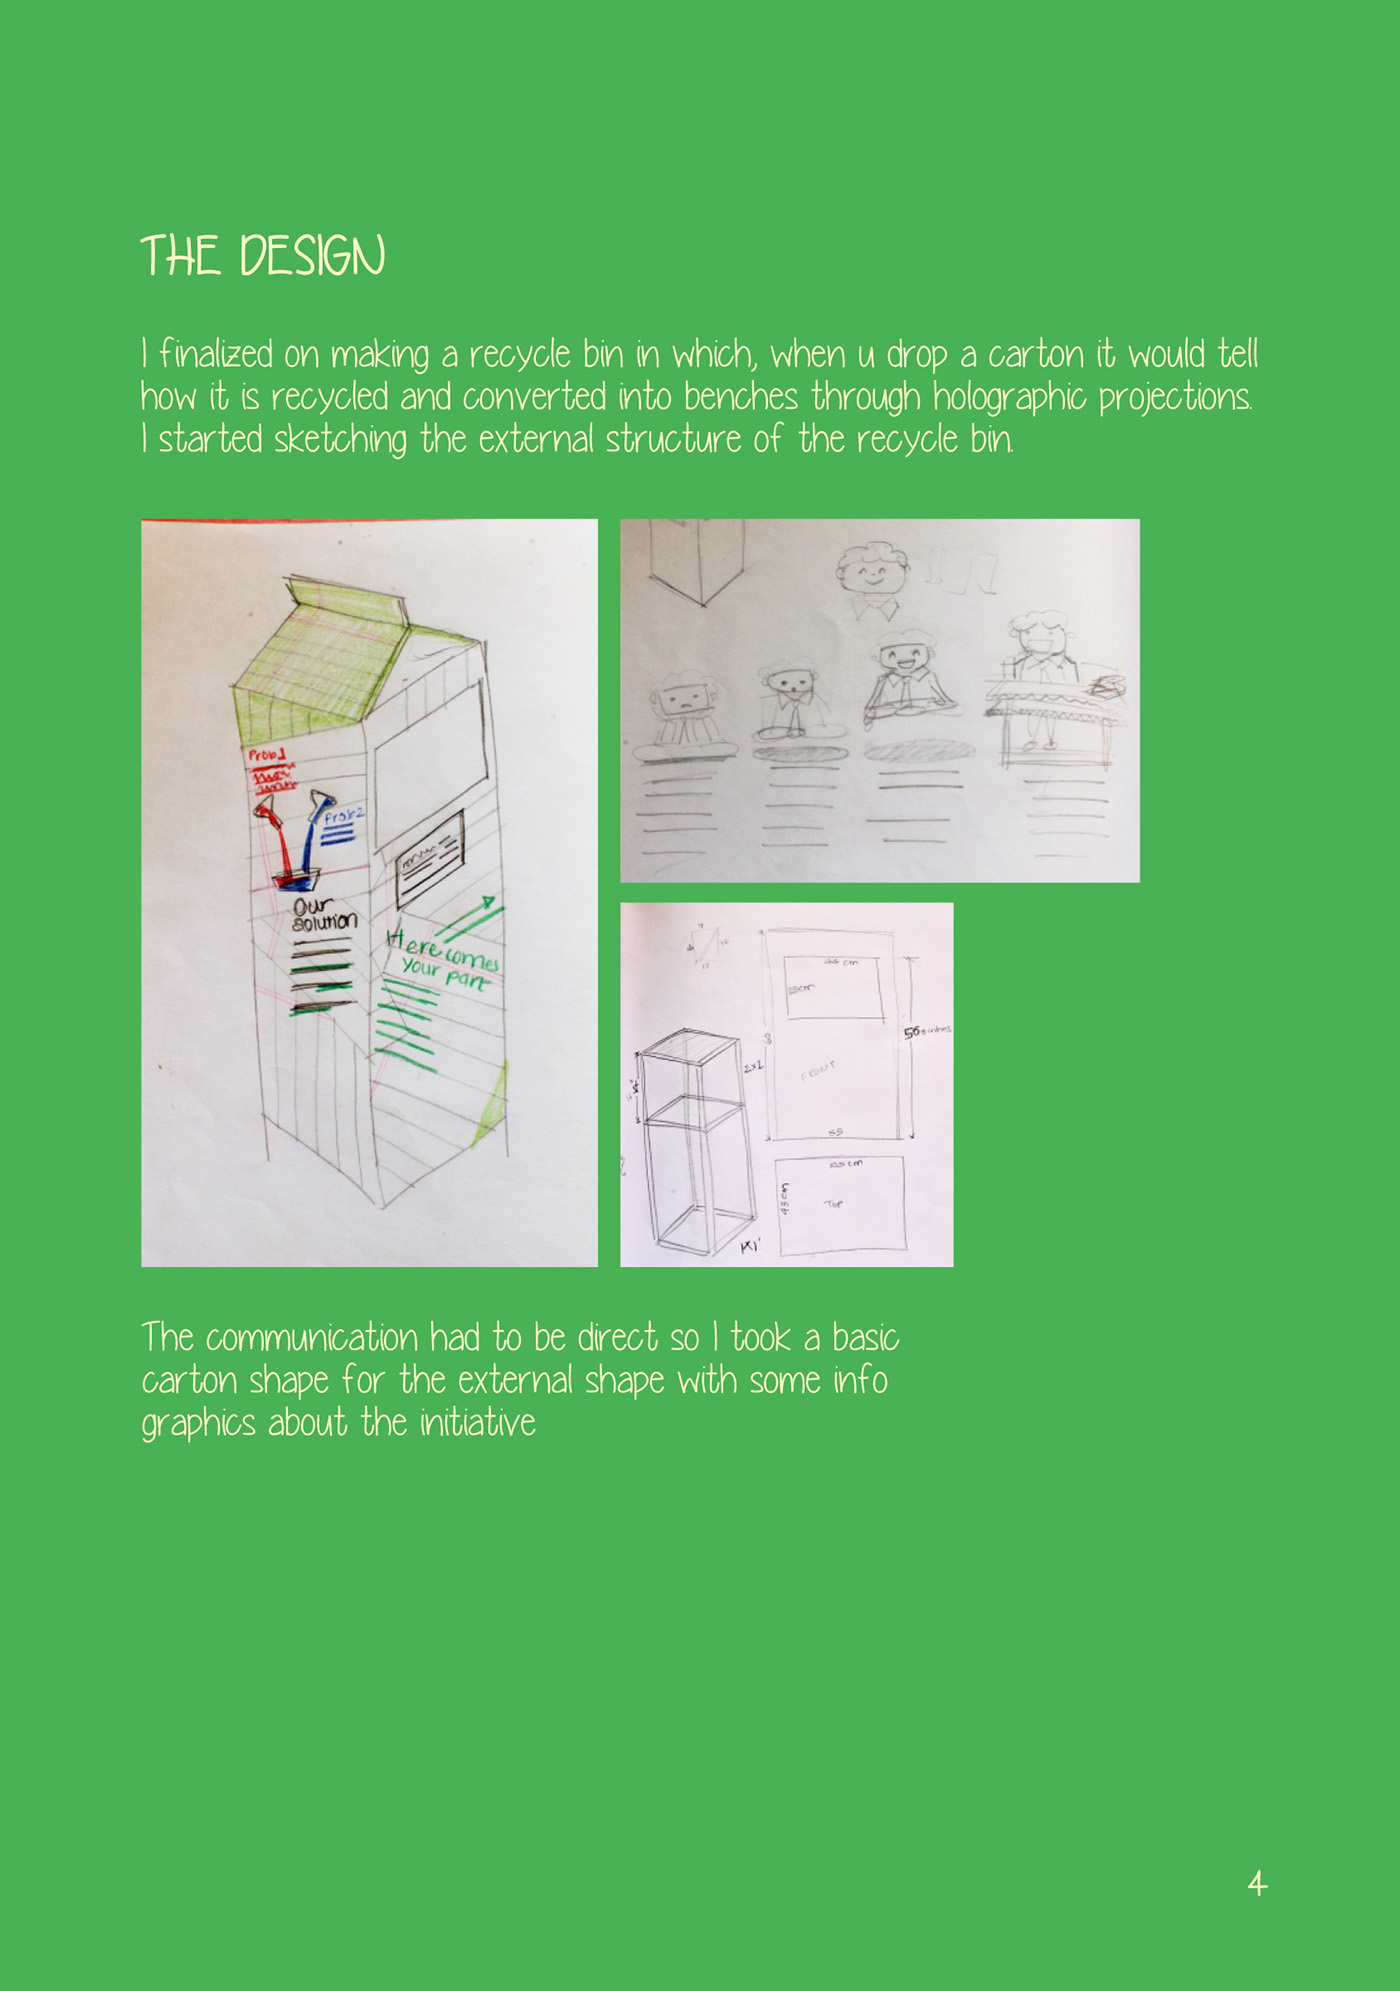 tetra pak stop motion paper animation recycle bin interactive social cause